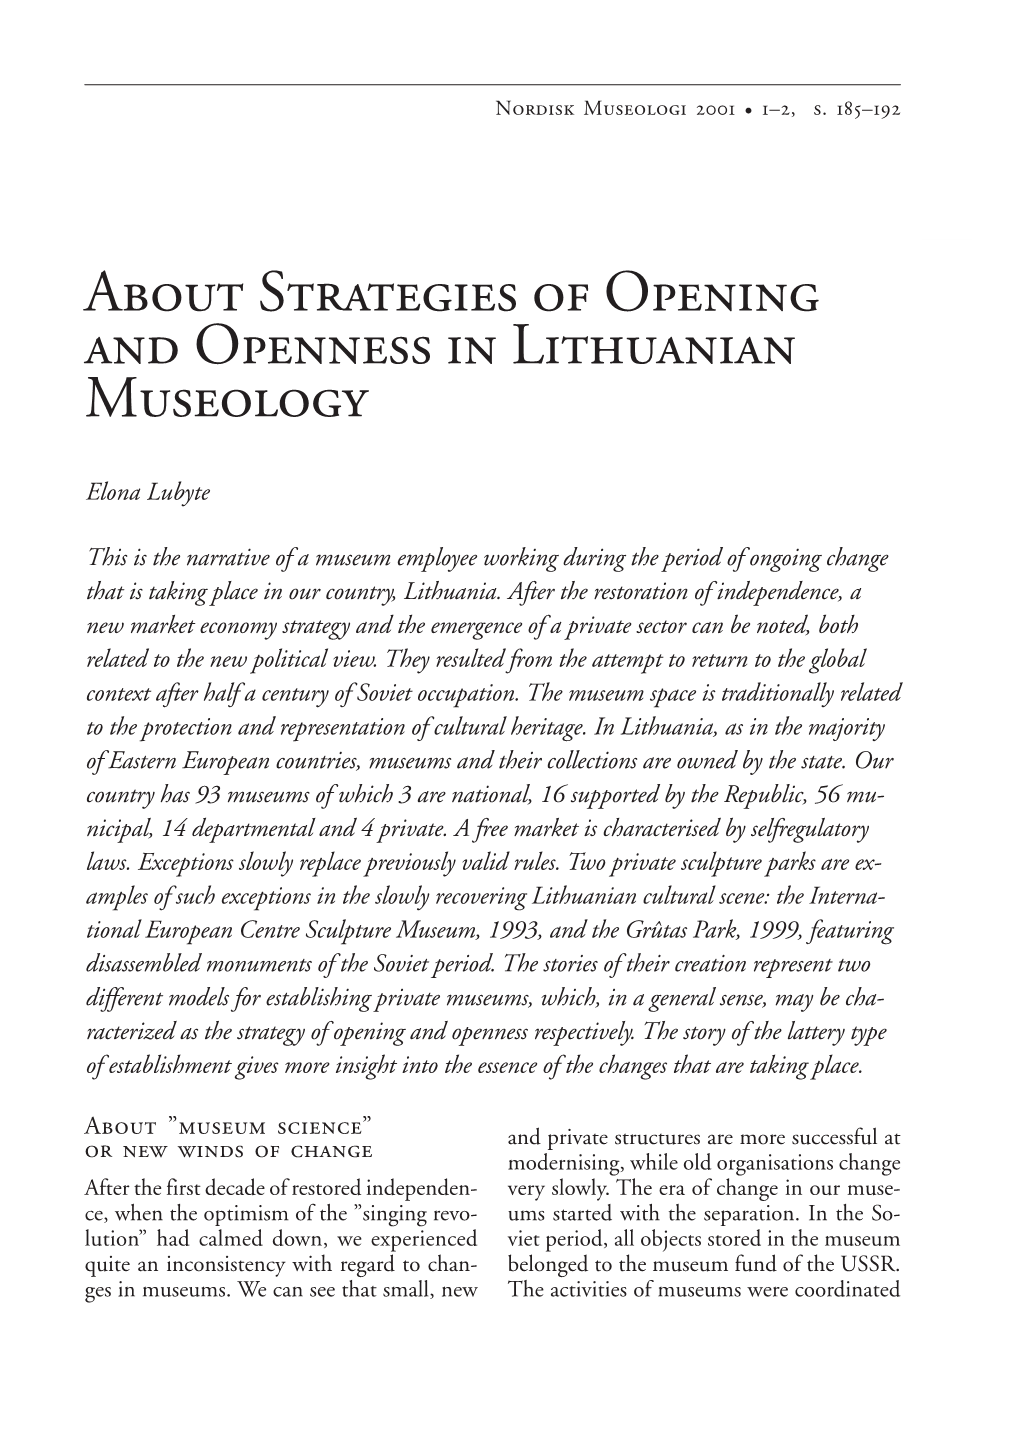 About Strategies of Opening and Openness in Lithuanian Museology